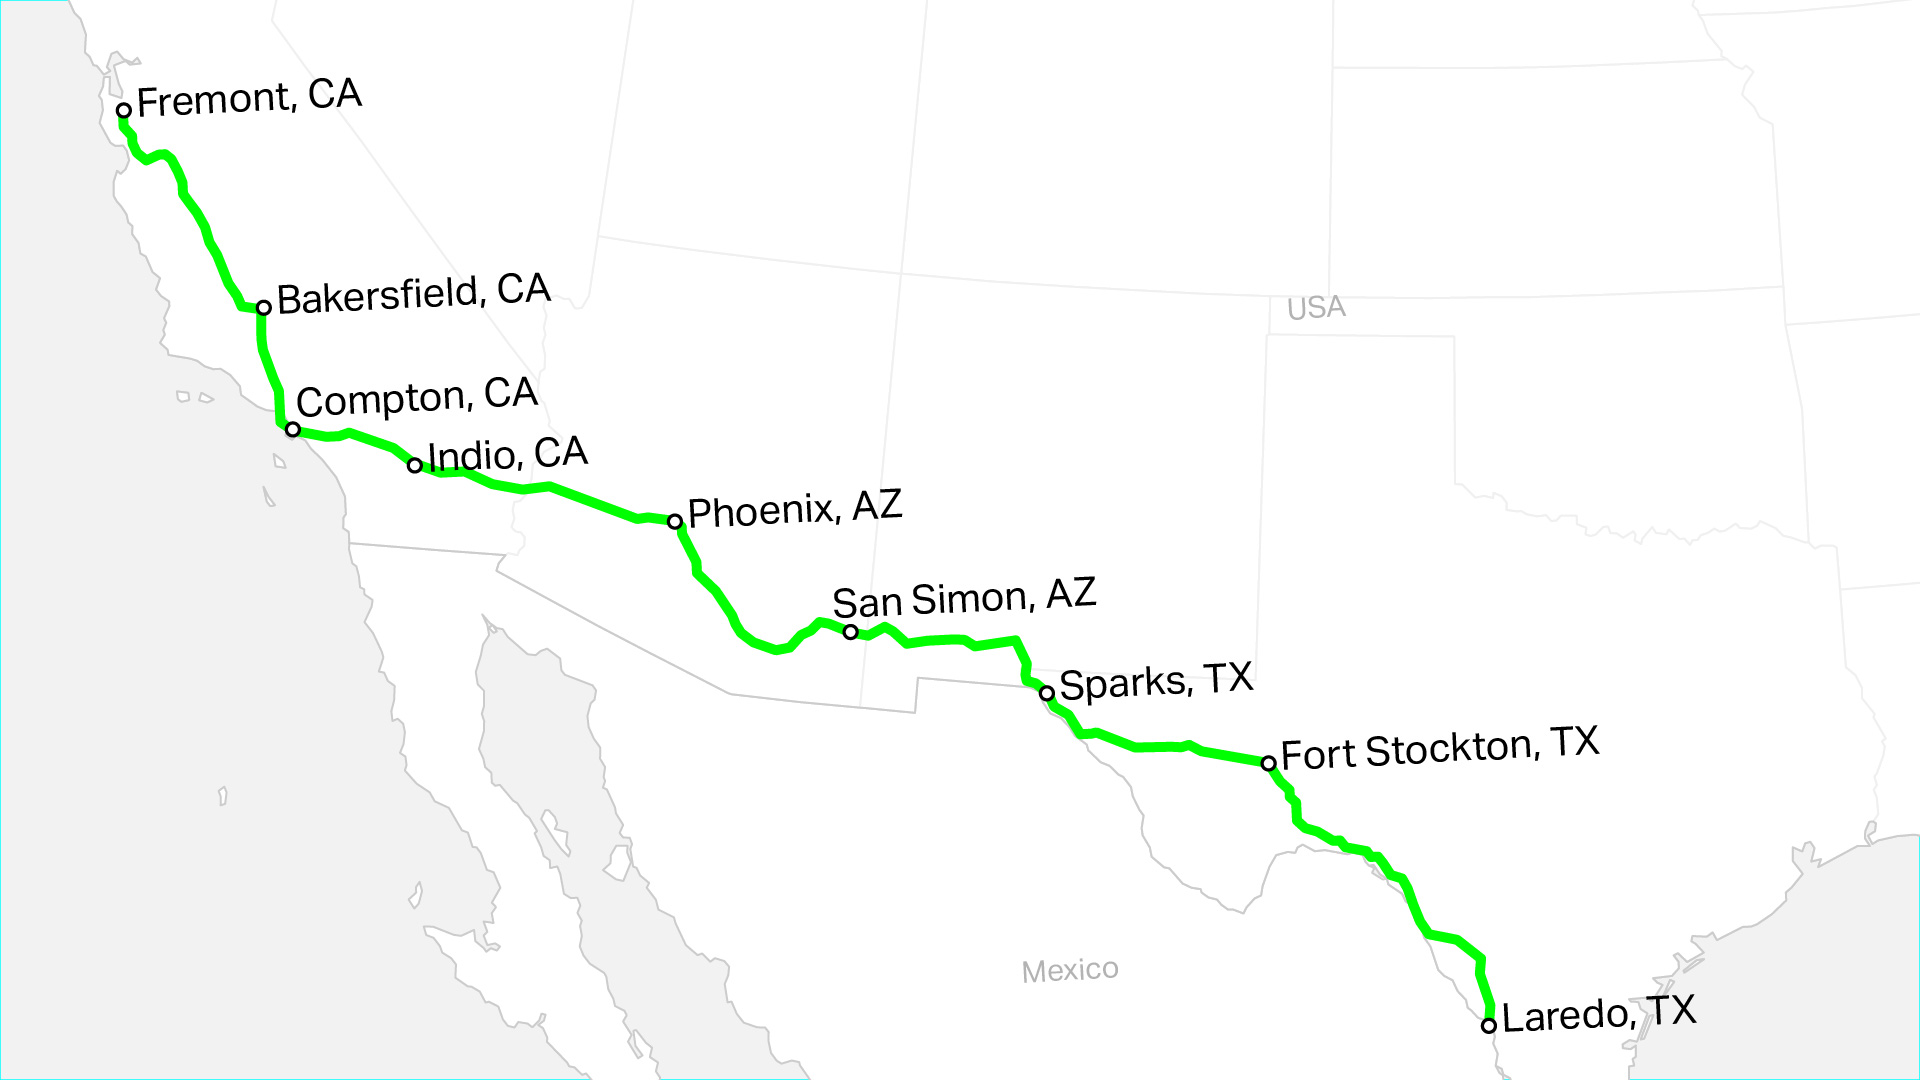 Map of proposed charging corridor from Fremont, CA to Laredo, TX